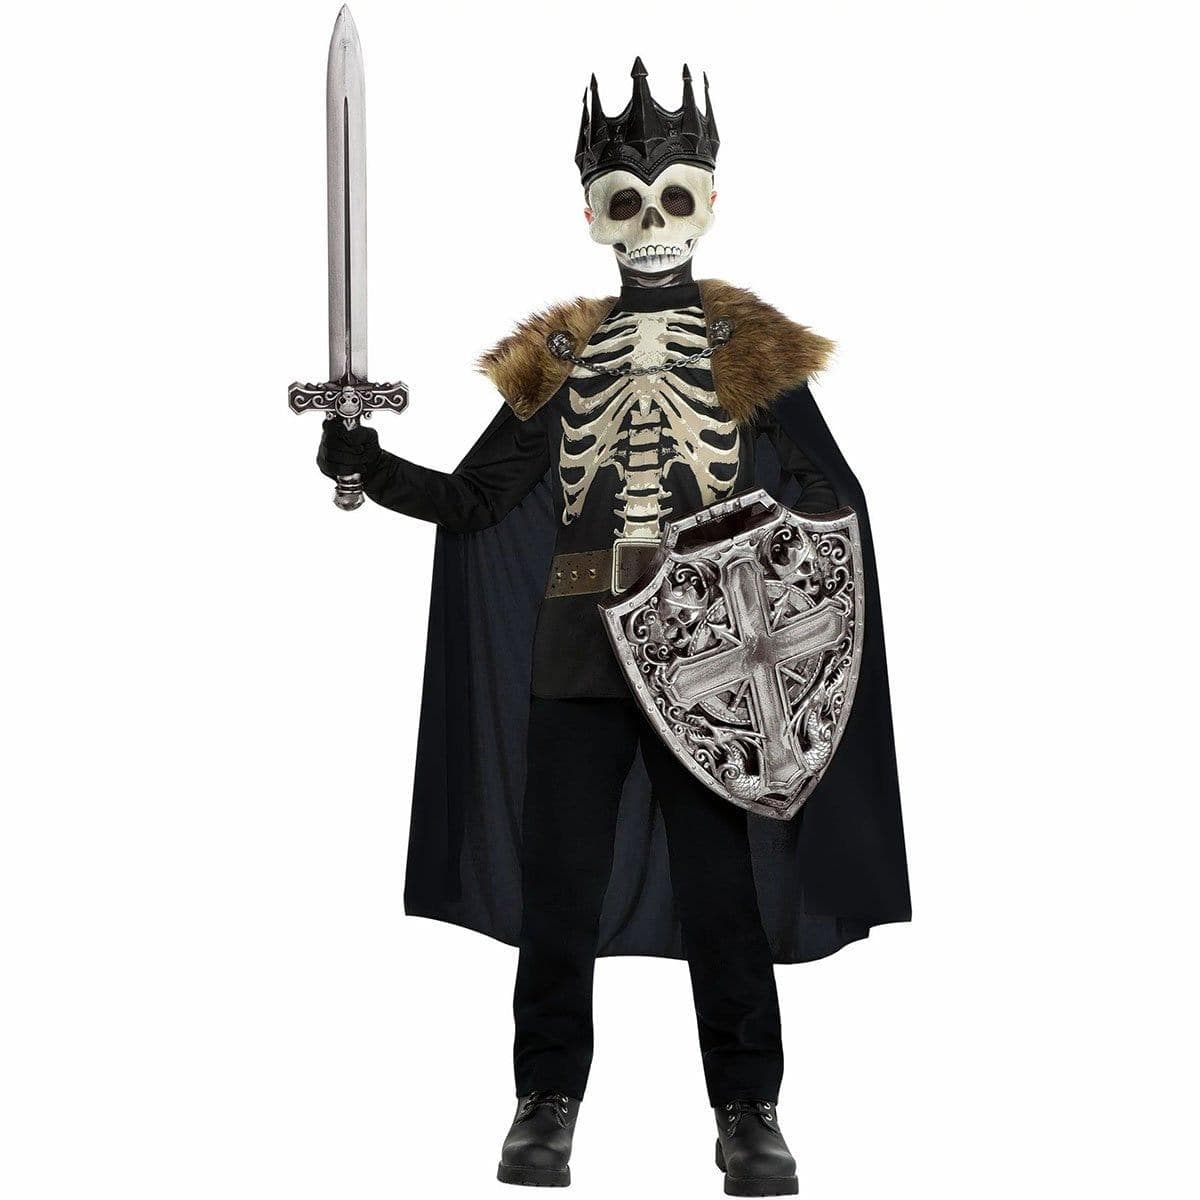 Buy Costumes Dark King Costume for Kids sold at Party Expert